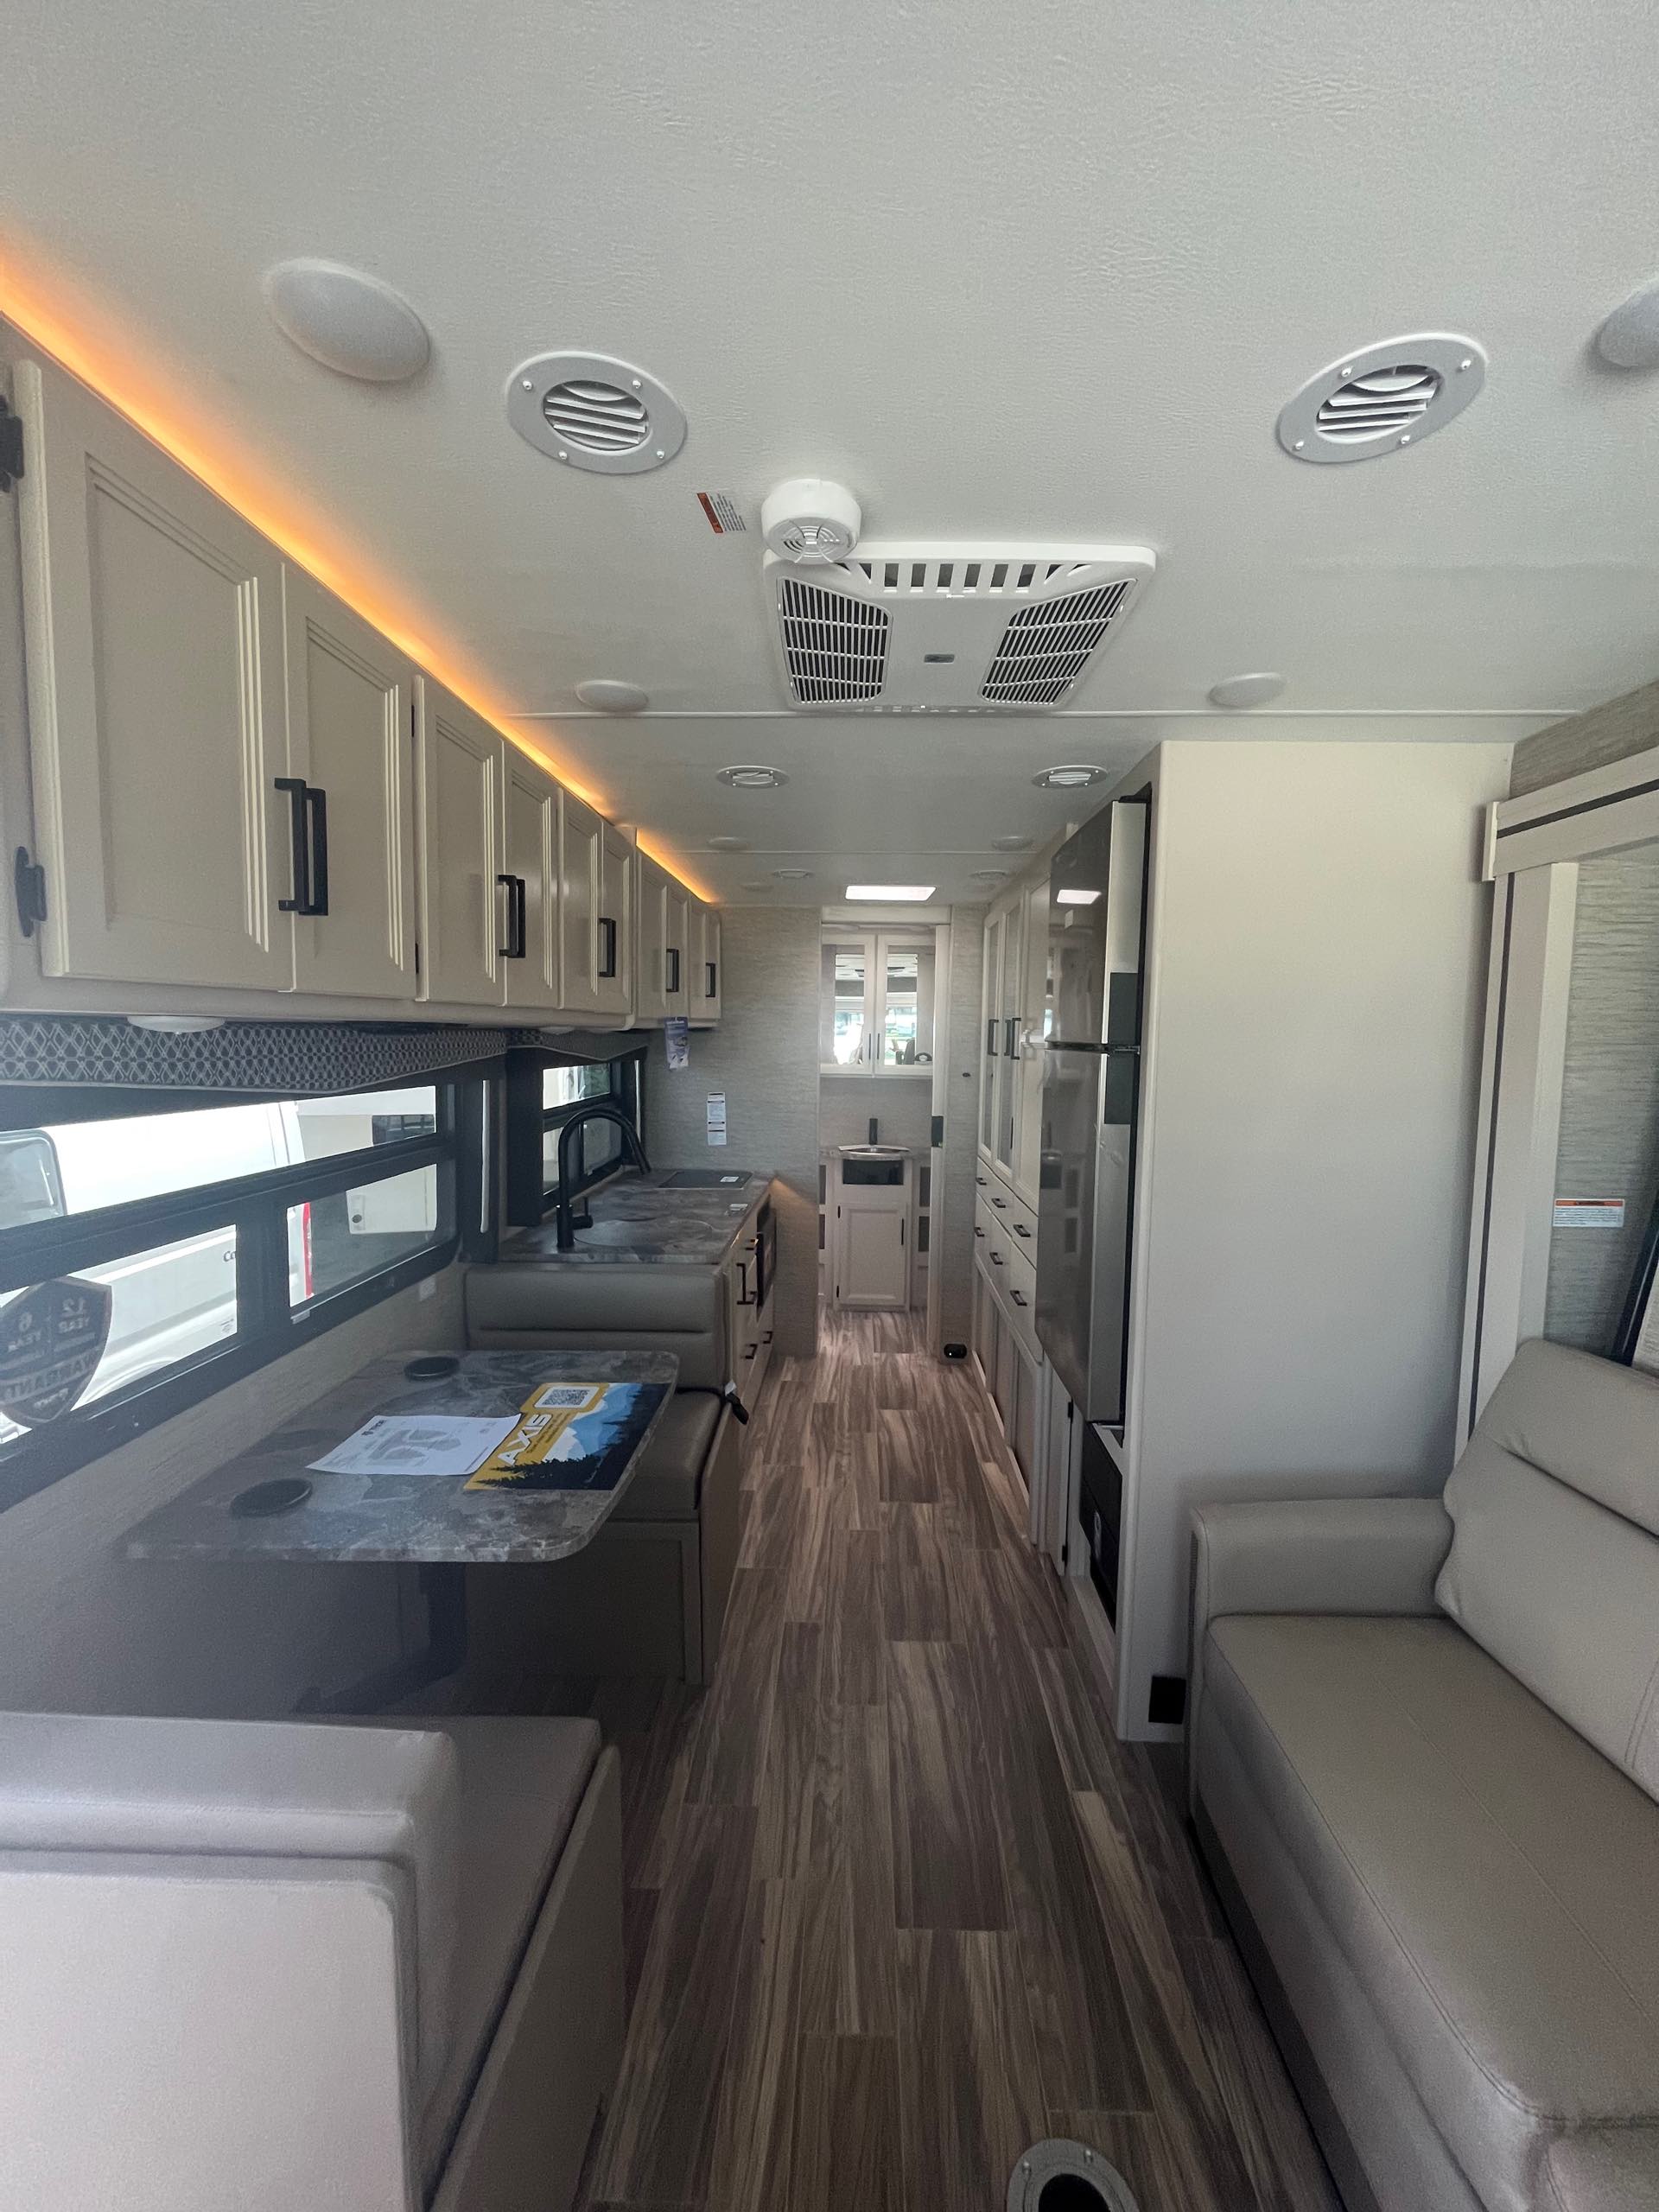 2023 Thor Motor Coach Axis 243 at Prosser's Premium RV Outlet